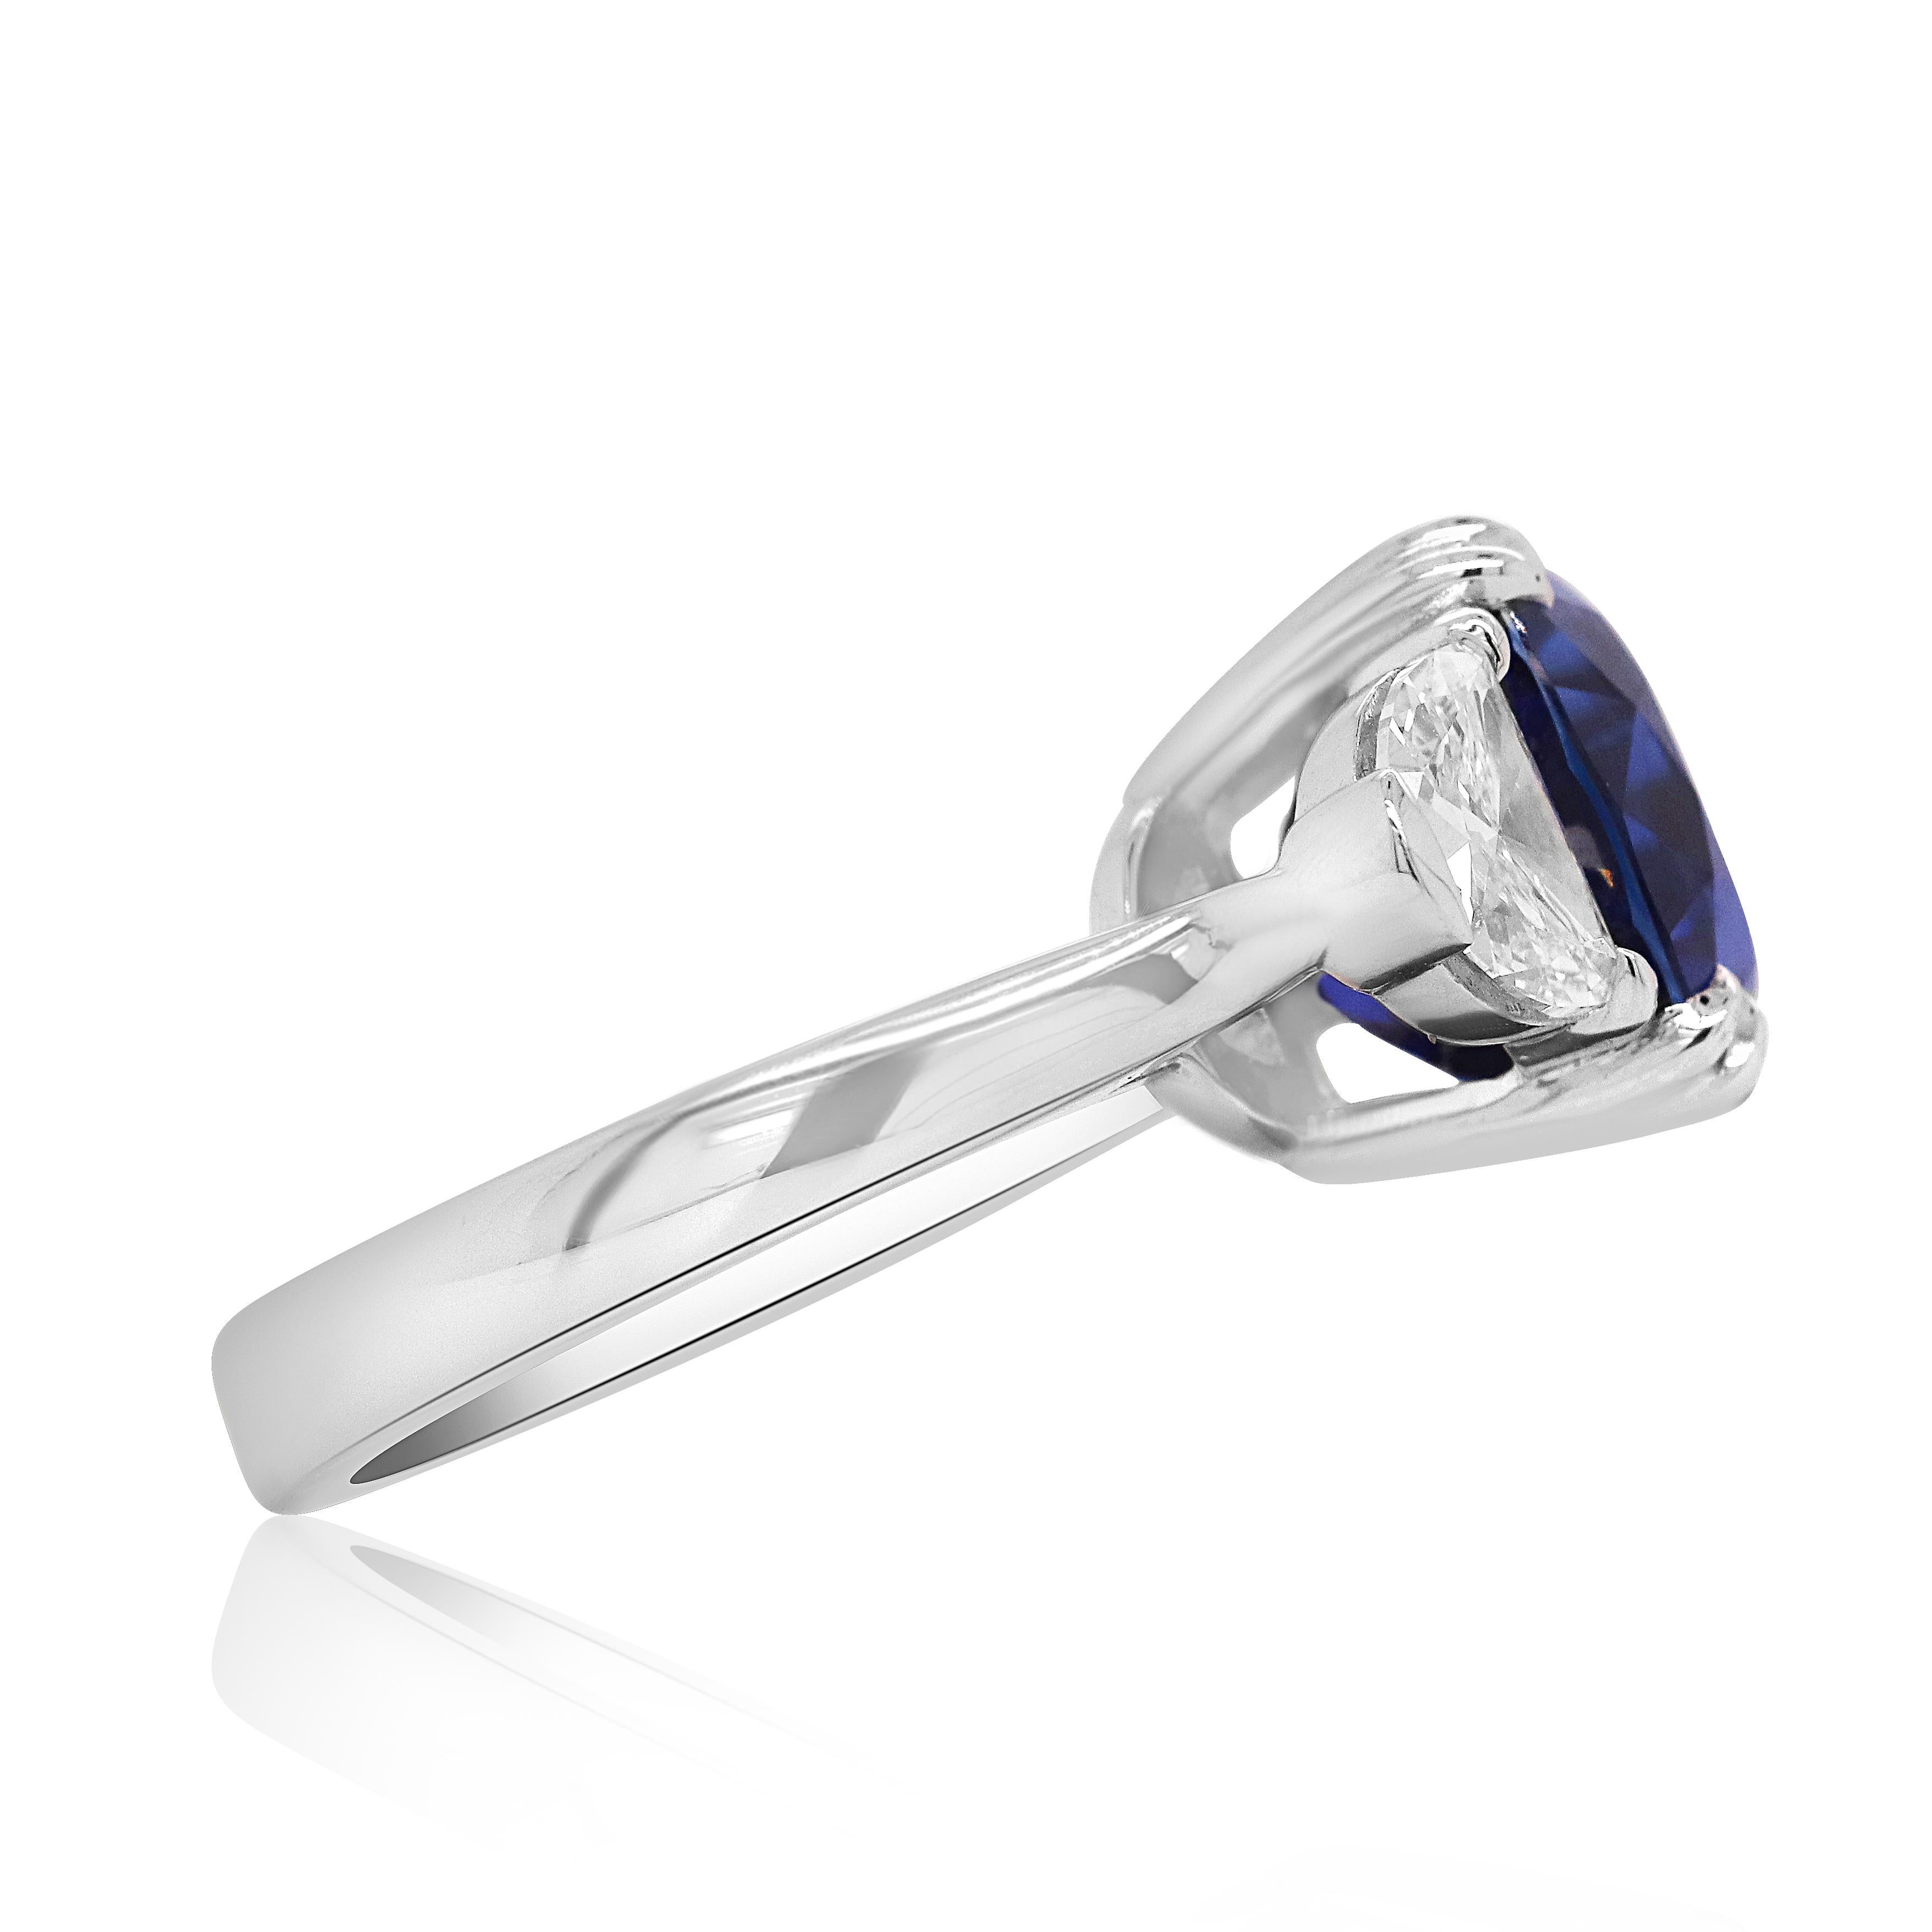 Metal: Platinum 

Center Stone: 1 Cushion Cut Ceylon Blue Sapphire at 8 Carats 

Side Stone Details: 2 Half Moon Diamonds at 1.01 Carats Total Weight 

Ring size: Customizable

Undeniably rare, colorfully bright, and promised to last a lifetime,